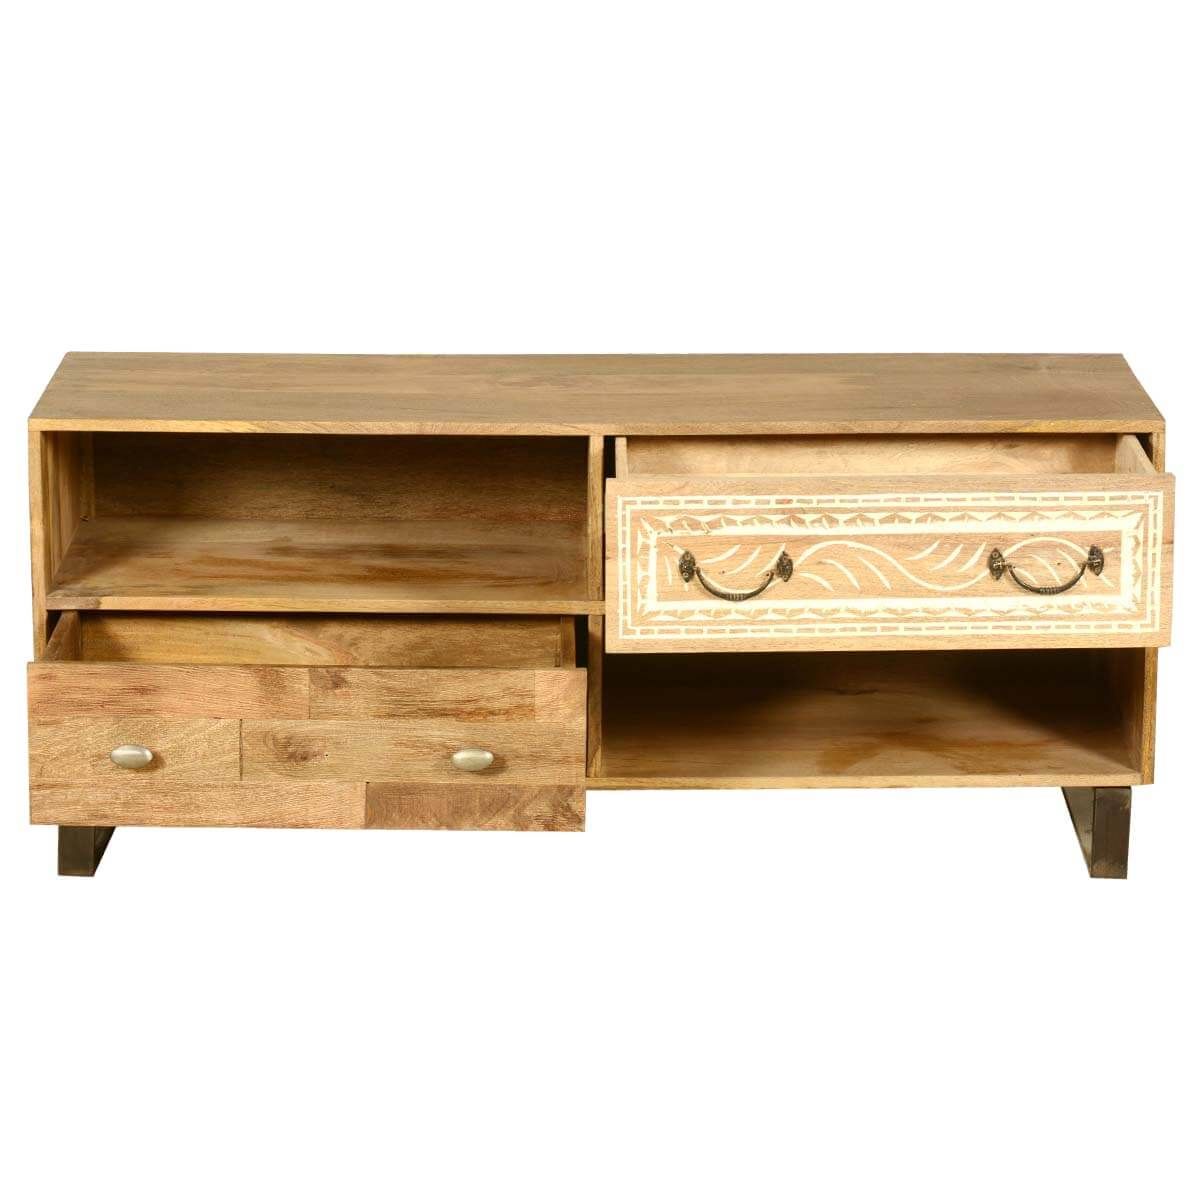 Modern Rustic Solid Wood Entertainment Center Tv Stand W 2 Pertaining To Contemporary Wood Tv Stands (View 14 of 15)